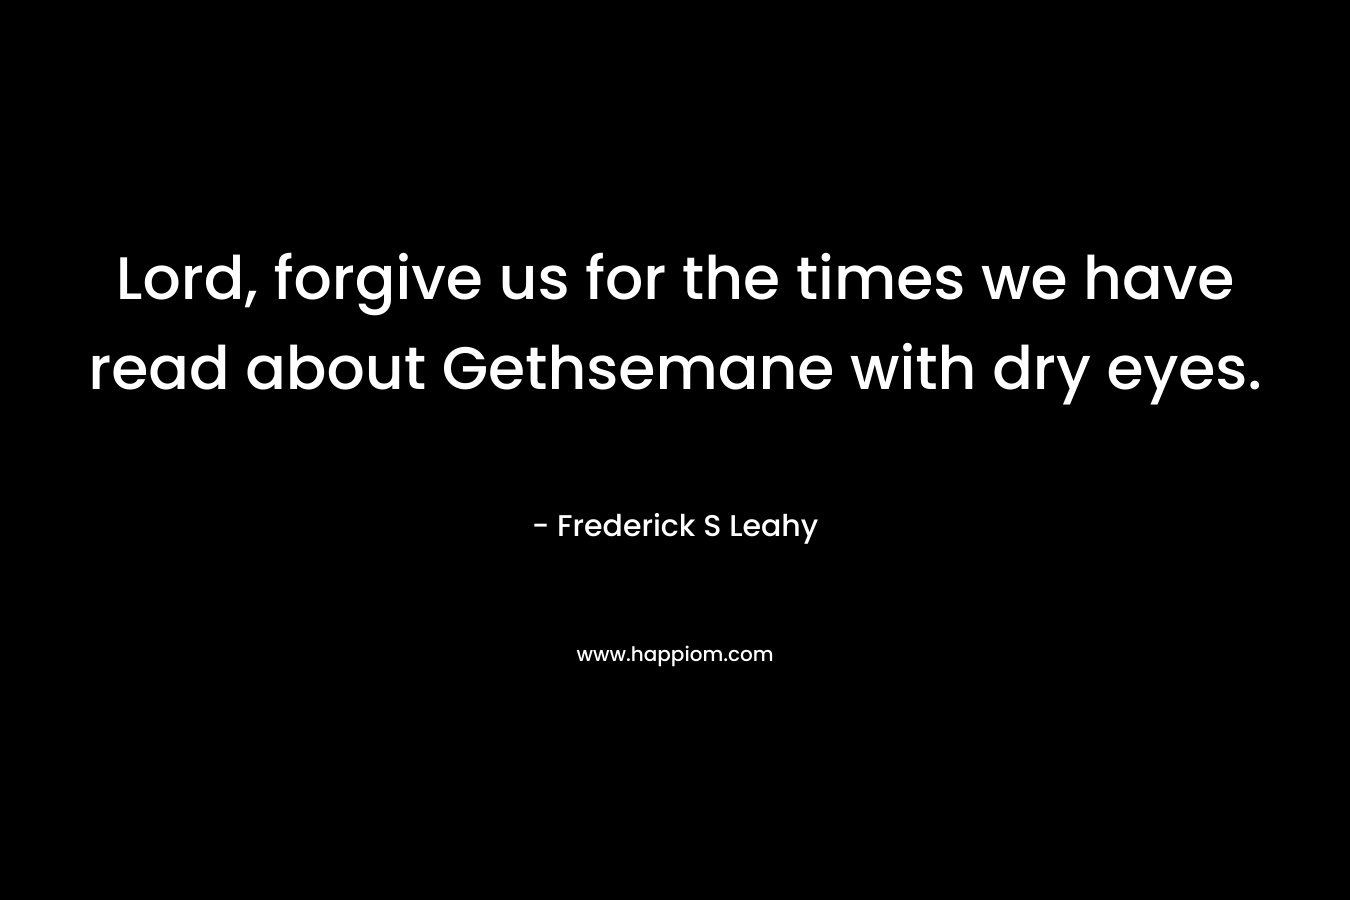 Lord, forgive us for the times we have read about Gethsemane with dry eyes. – Frederick S Leahy